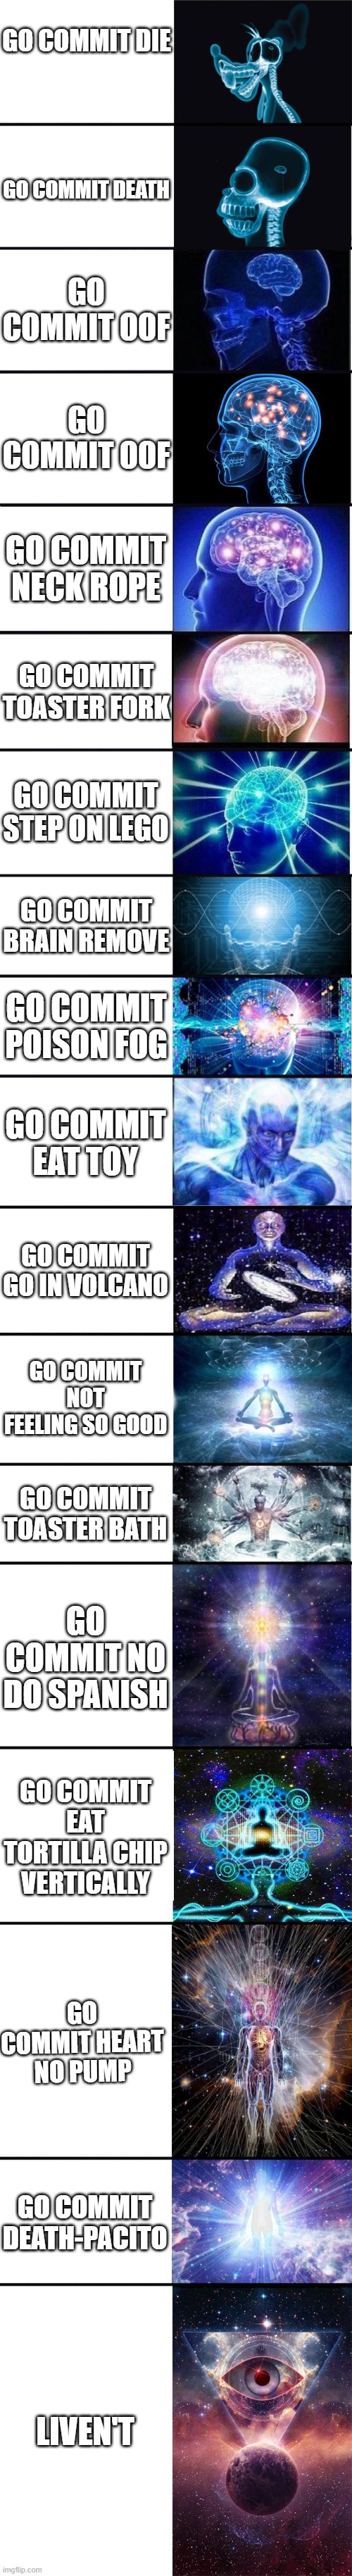 expanding brain: 9001 | GO COMMIT DIE; GO COMMIT DEATH; GO COMMIT OOF; GO COMMIT OOF; GO COMMIT NECK ROPE; GO COMMIT TOASTER FORK; GO COMMIT STEP ON LEGO; GO COMMIT BRAIN REMOVE; GO COMMIT POISON FOG; GO COMMIT EAT TOY; GO COMMIT GO IN VOLCANO; GO COMMIT NOT FEELING SO GOOD; GO COMMIT TOASTER BATH; GO COMMIT NO DO SPANISH; GO COMMIT EAT TORTILLA CHIP VERTICALLY; GO COMMIT HEART NO PUMP; GO COMMIT DEATH-PACITO; LIVEN'T | image tagged in expanding brain 9001 | made w/ Imgflip meme maker